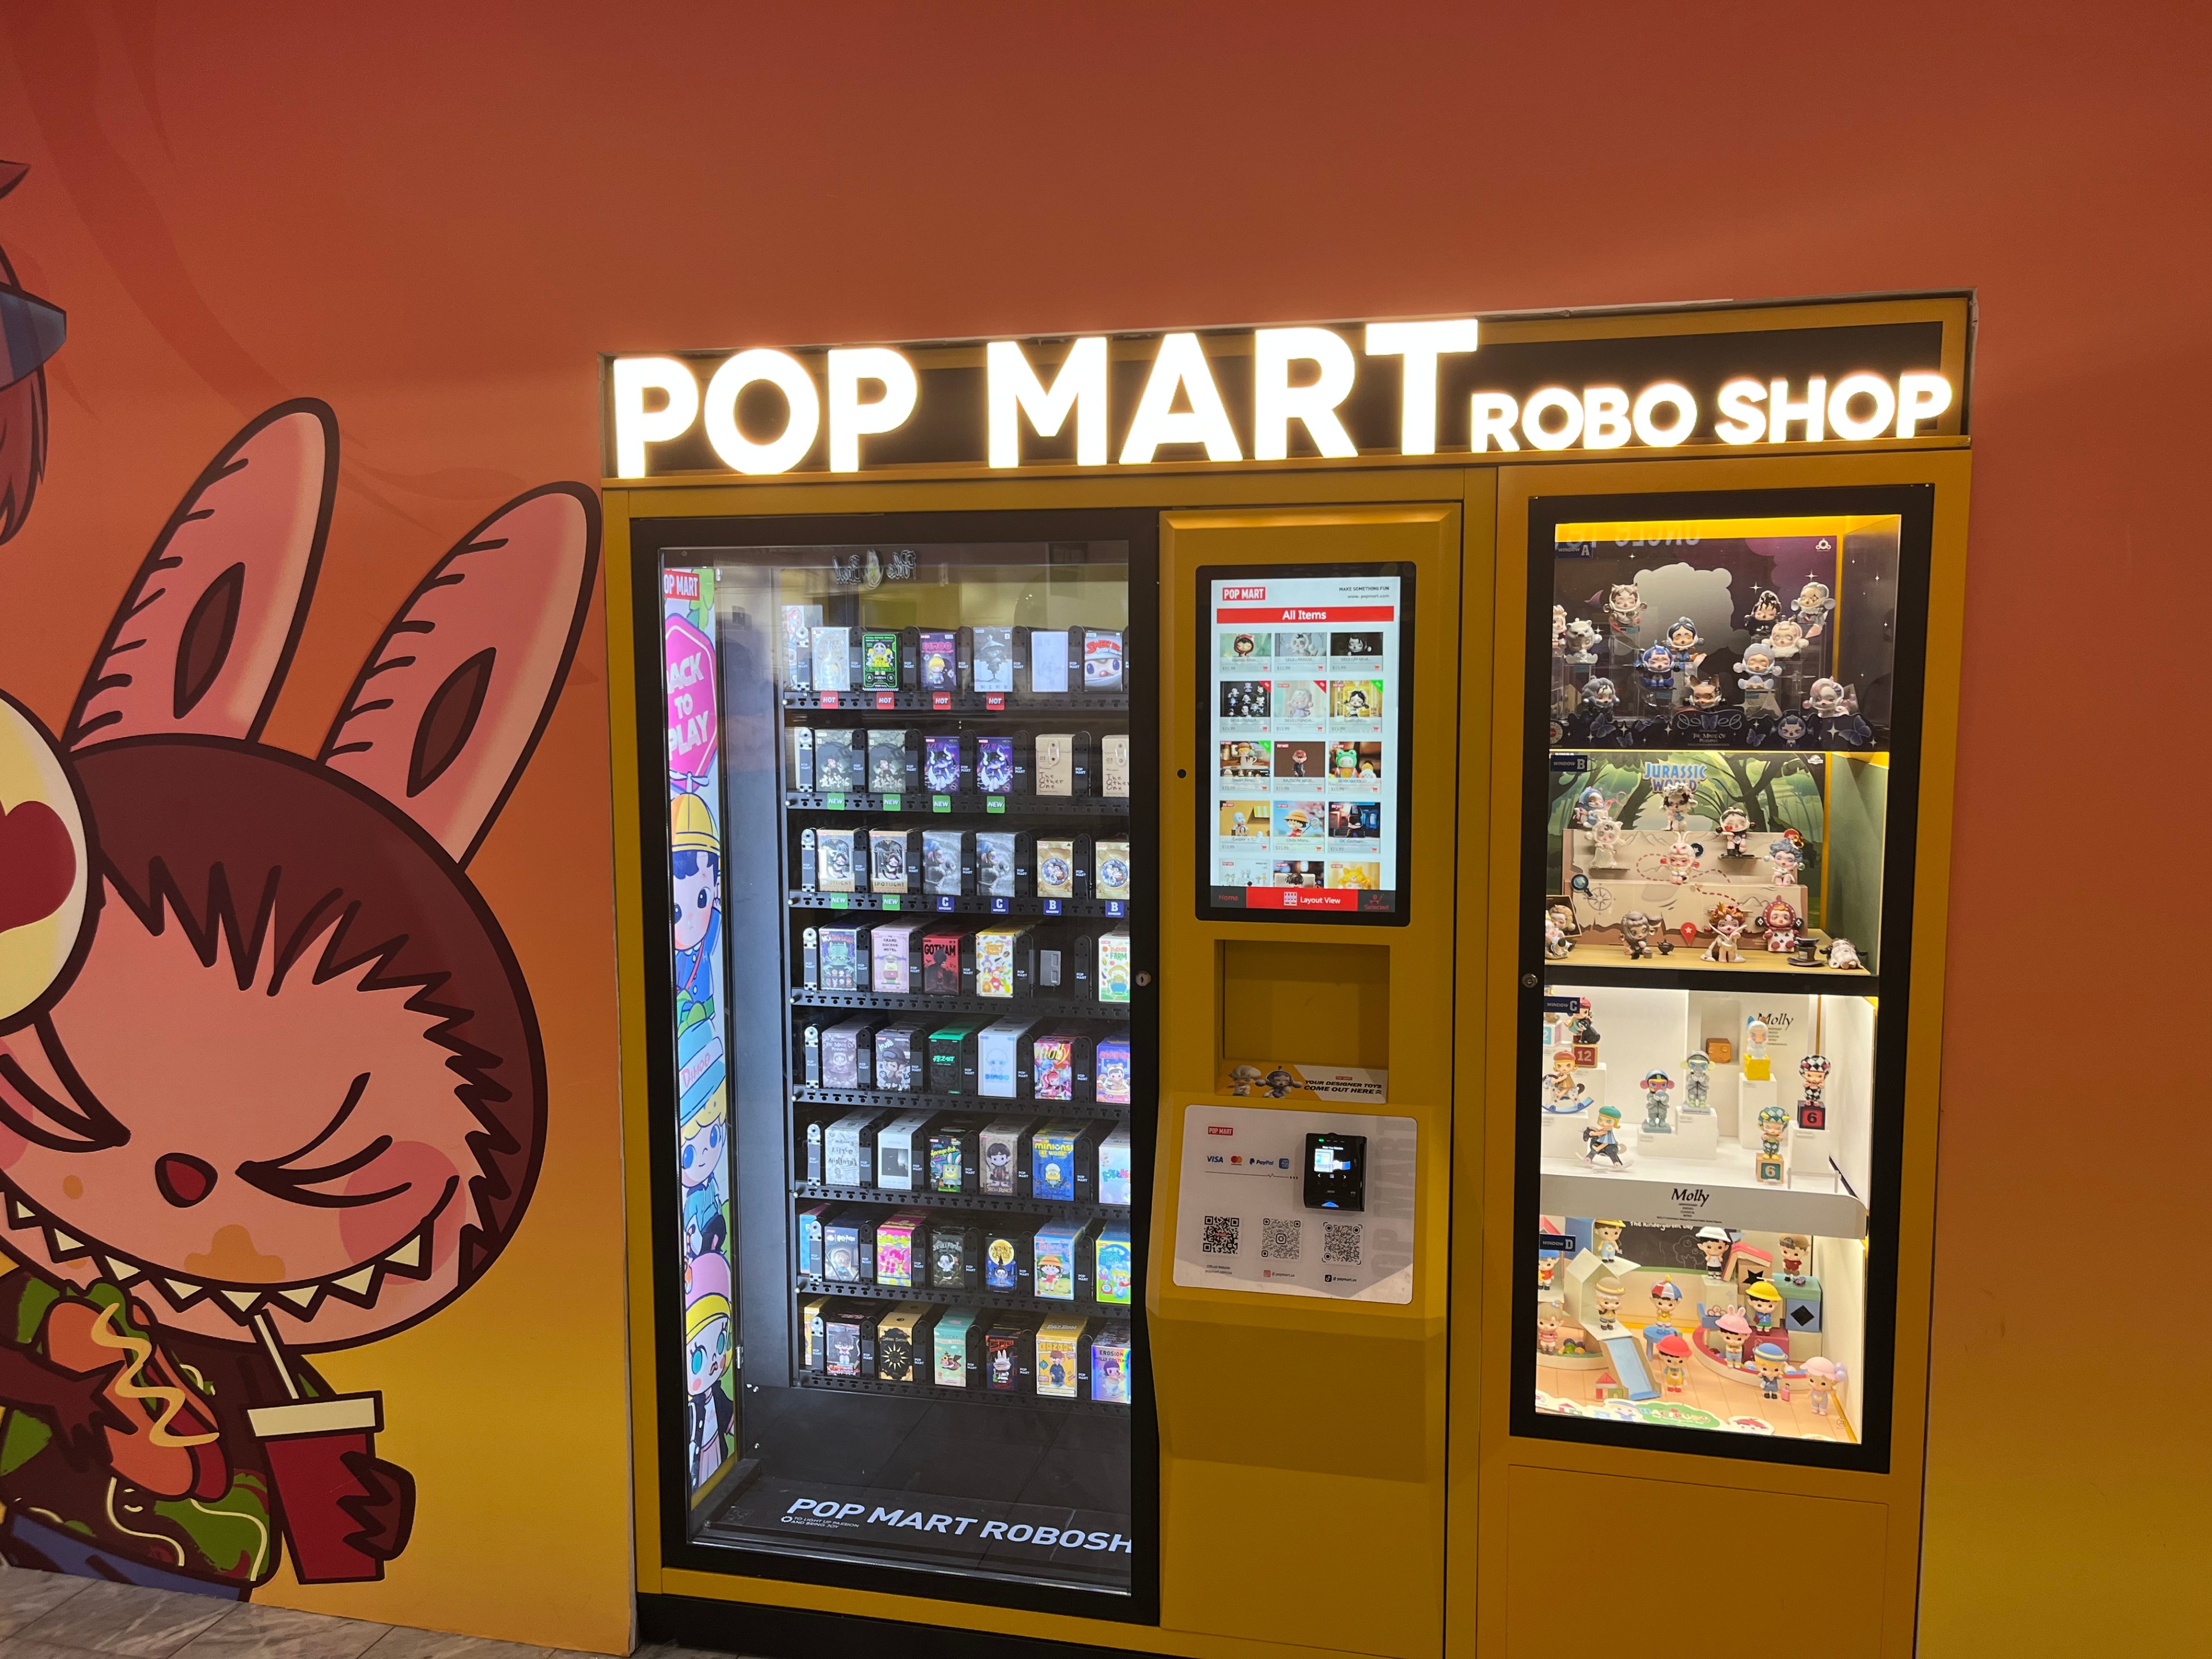 The Pop Mart Robo Shop is installed on the wall at Stonestown Galleria.